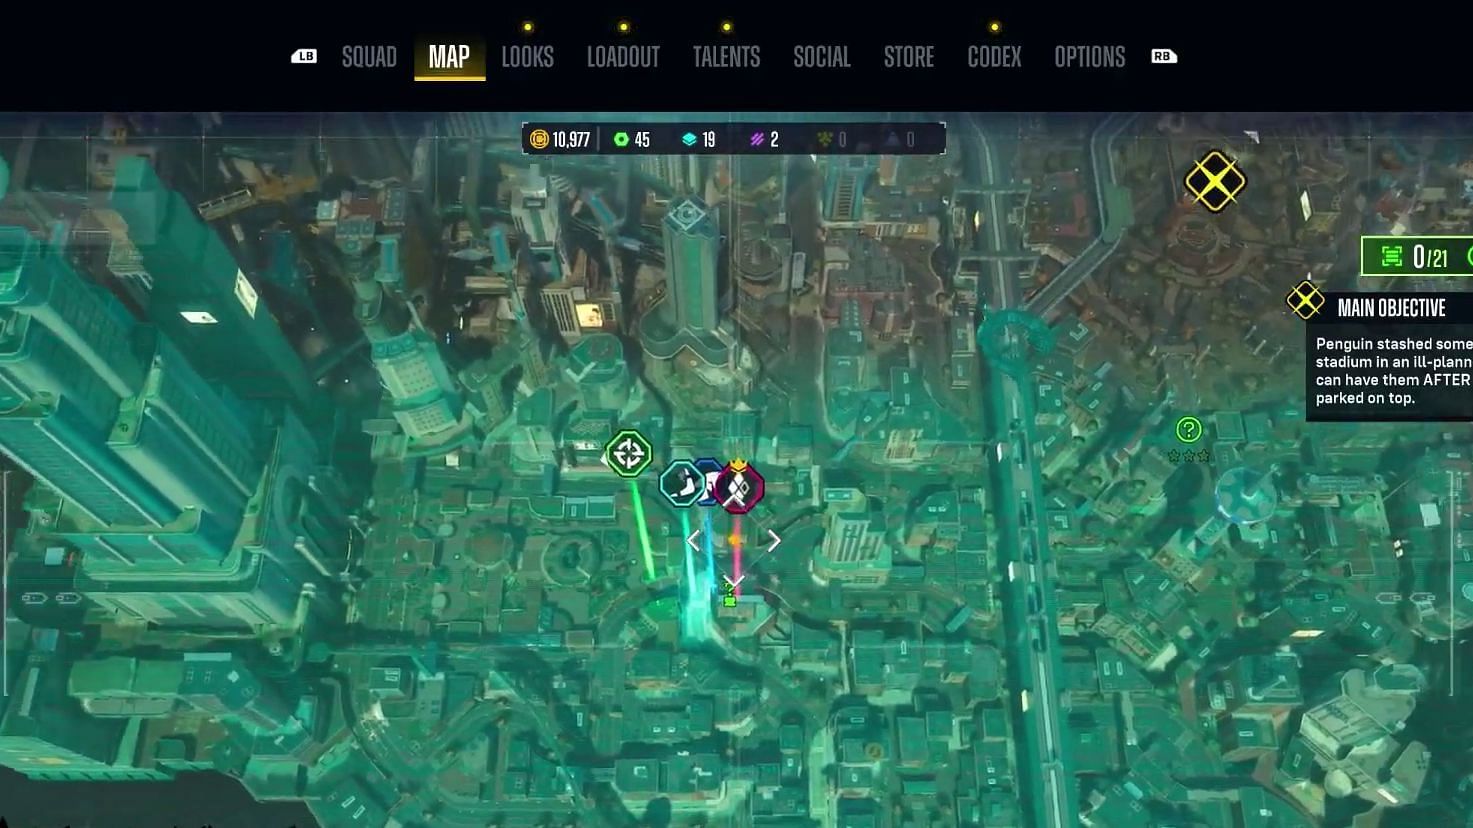 Spot #34 of Suicide Squad Kill the Justice League Riddler Trophy Locations (Image via YouTube/Pixelz)